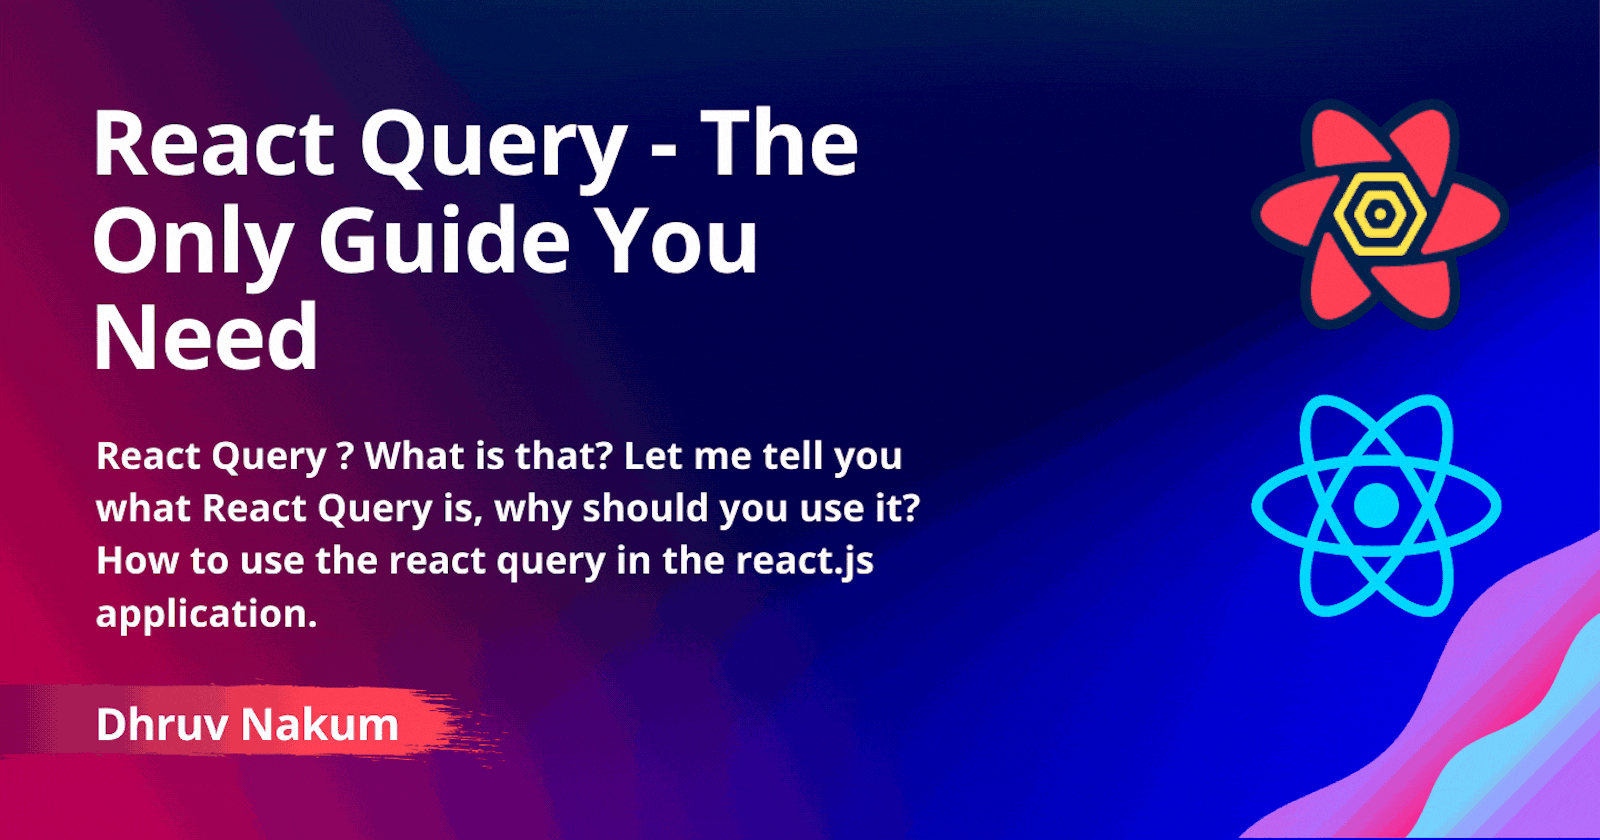 React Query - The Only Guide You Need